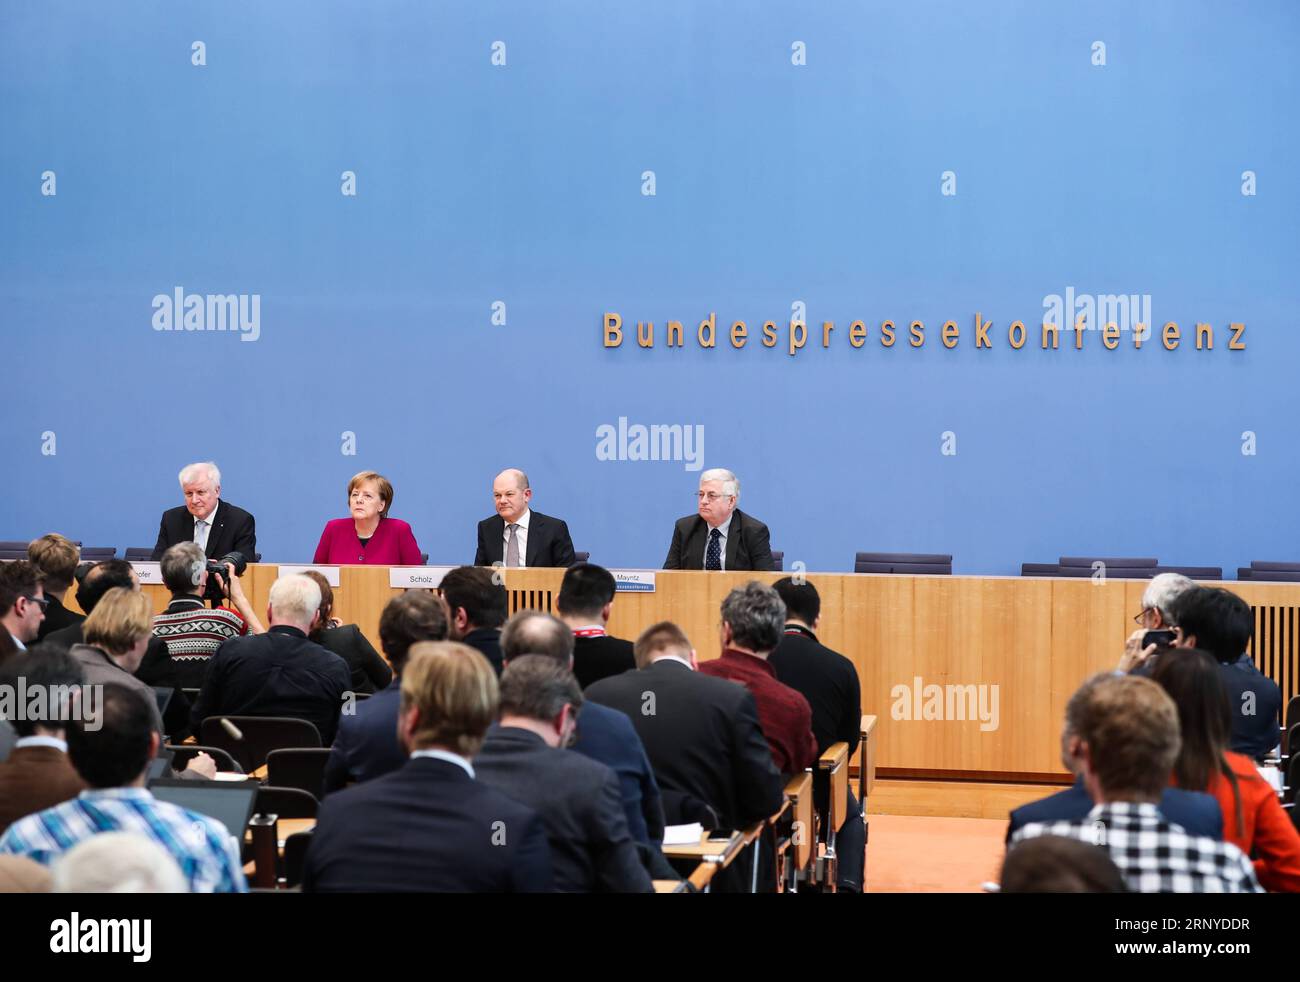 (180312) -- BERLIN, March 12, 2018 -- German Chancellor and Christian Democratic Union (CDU) leader Angela Merkel (2nd L, rear), interim German Social Democrats (SPD) leader Olaf Scholz (2nd R, rear) and Christian Social Union (CSU) leader Horst Seehofer (1st L, rear) attend a press conference in Berlin, capital of Germany, on March 12, 2018. The leaders of the Christian Democratic Union (CDU), Christian Social Union (CSU) and German Social Democrats (SPD) revealed the key priorities of Germany s new federal government on Monday. ) GERMANY-BERLIN-GRAND COALITION-AGREEMENT ShanxYuqi PUBLICATION Stock Photo